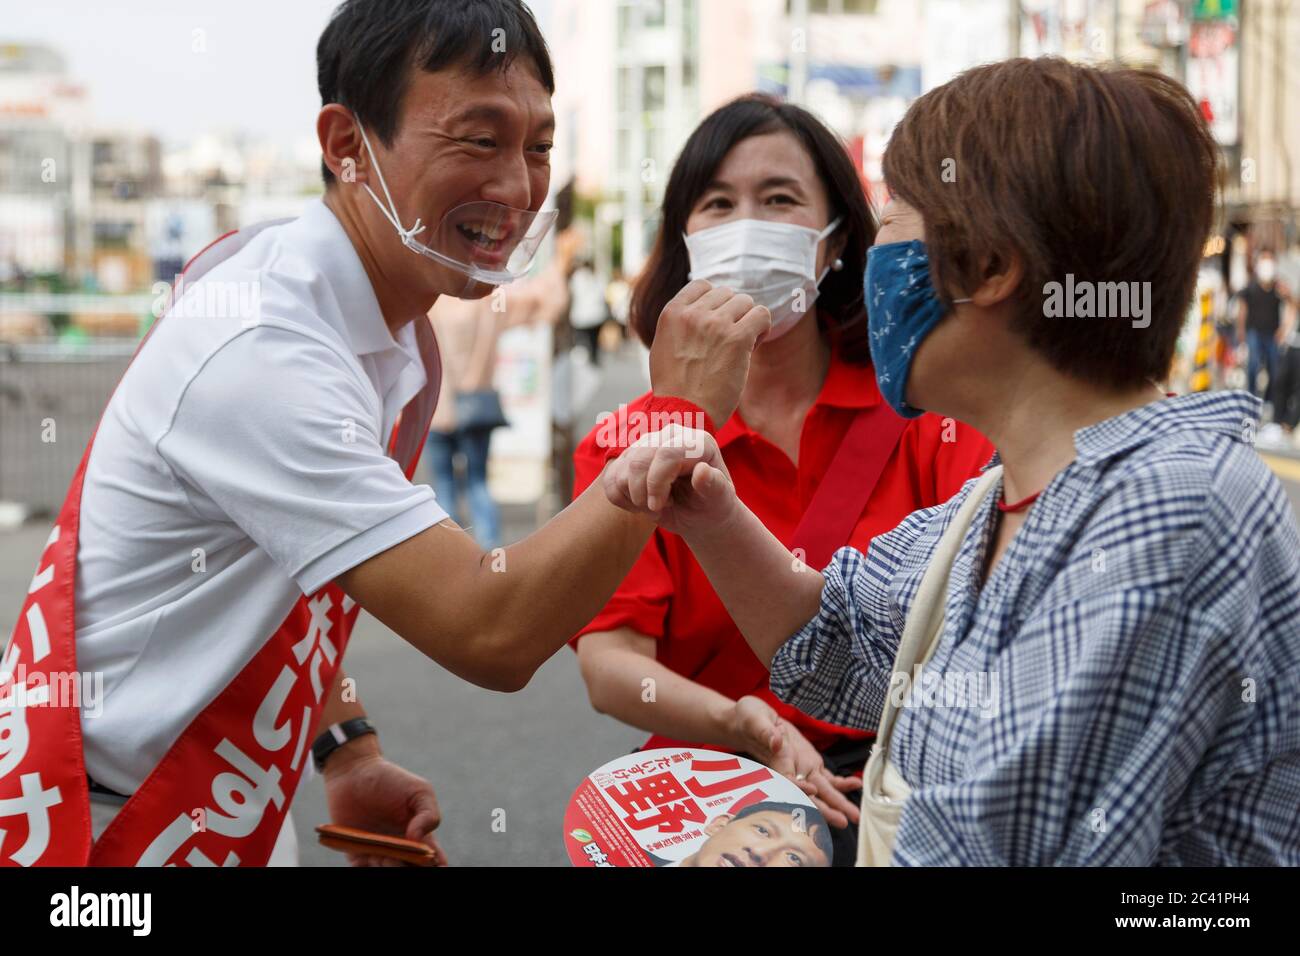 Tokyo, Japan. 23rd June, 2020. Candidate Taisuke Ono wearing a mouth shield greets voters with an elbow bump during his campaign for the Tokyo gubernatorial election outside Shimokitazawa Station. Ono, former vice governor of Kumamoto Prefecture, is campaigning for the Tokyo gubernatorial election, which will be held on July 5. Credit: Rodrigo Reyes Marin/ZUMA Wire/Alamy Live News Stock Photo